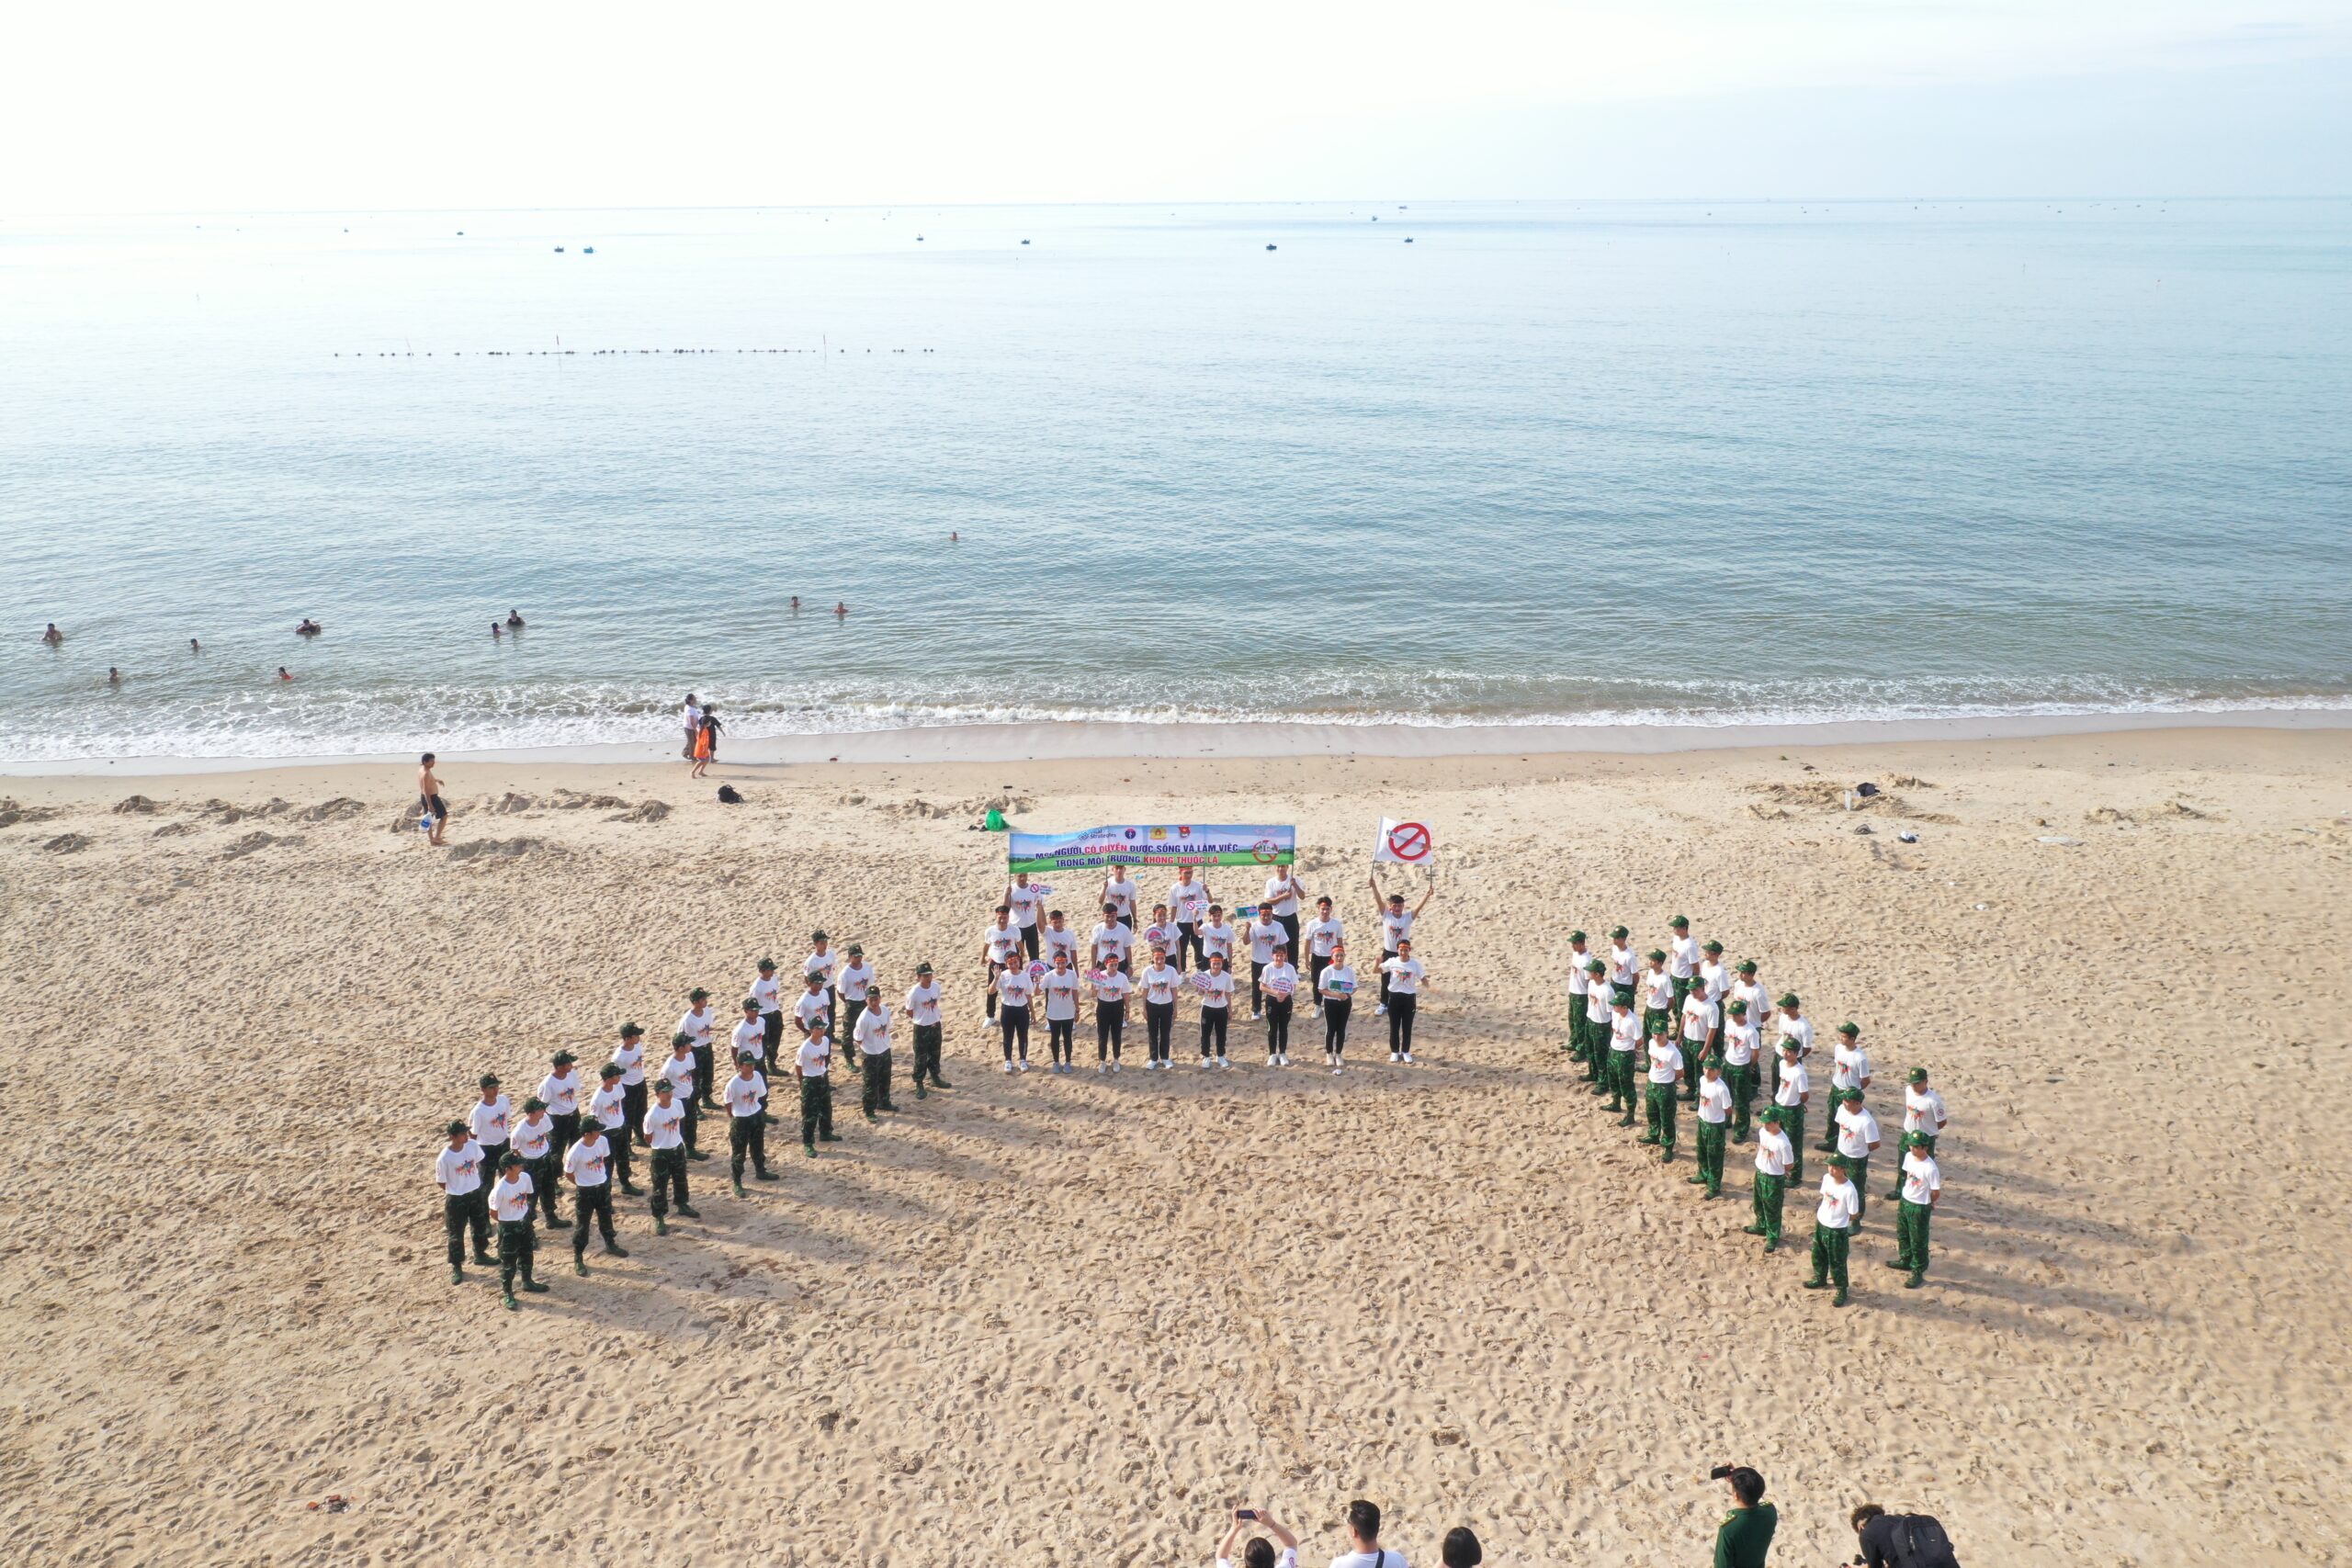 Youth Union in Vietnam advocate for smoke-free beaches